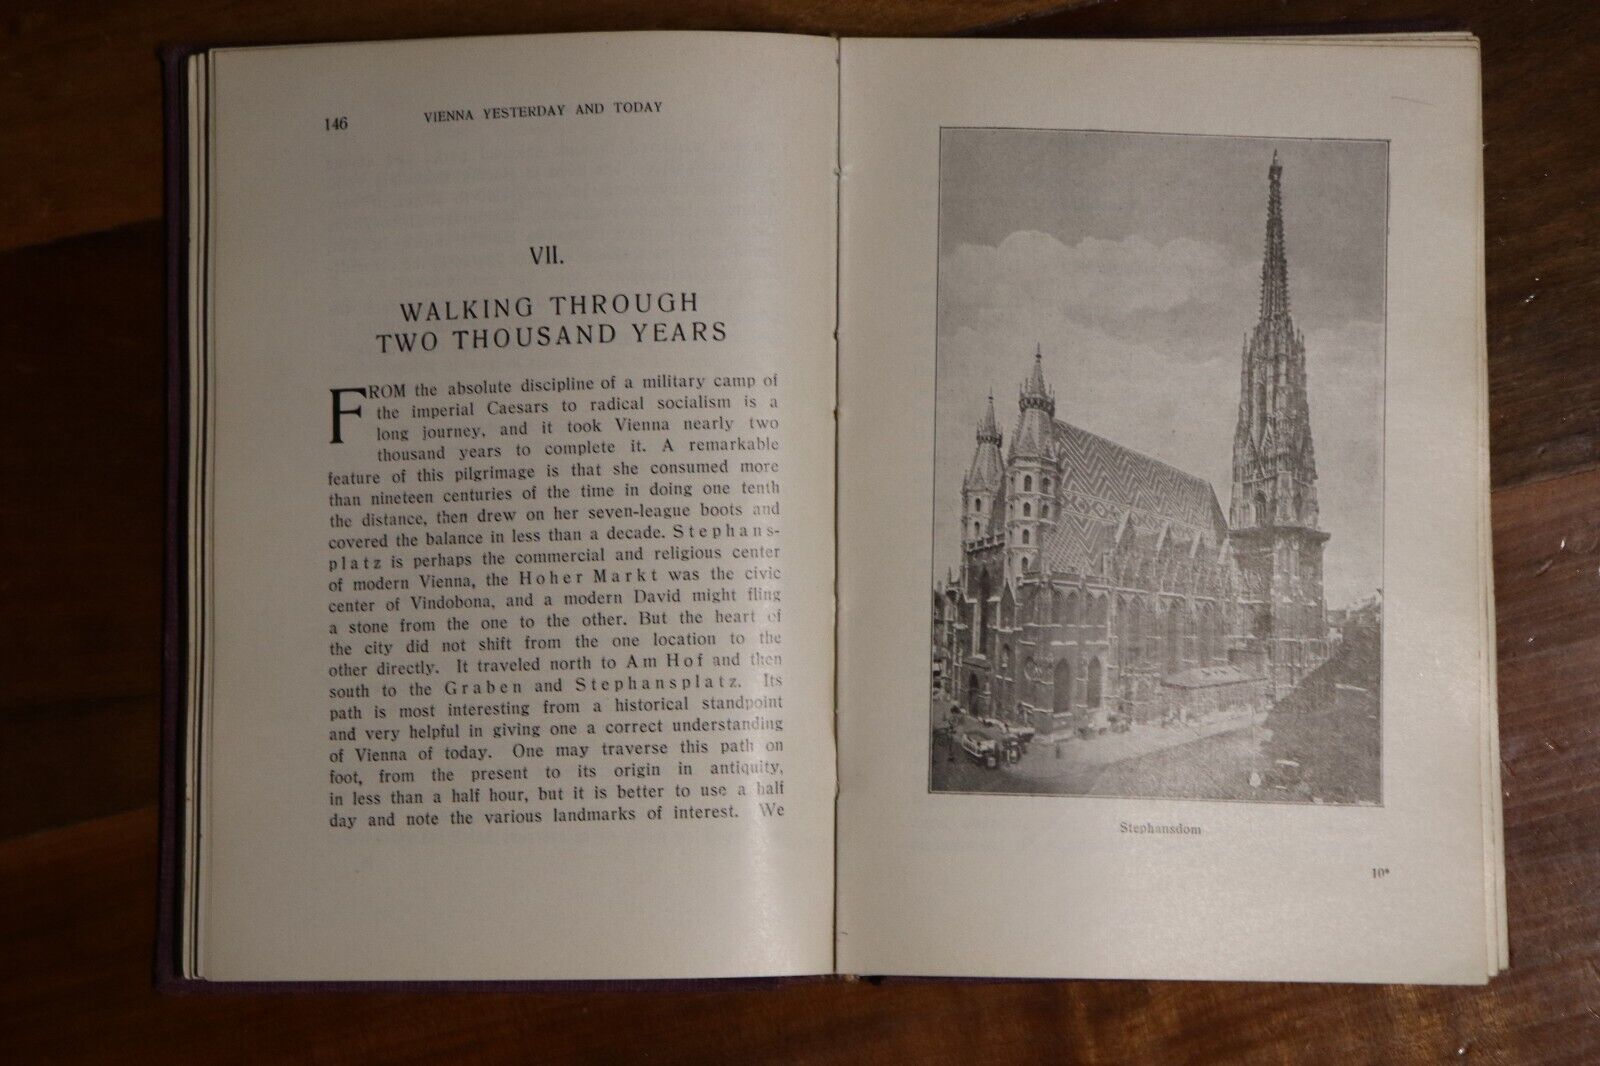 Vienna: Yesterday and Today by JA Mahan - 1933 - Austrian Travel & History Book